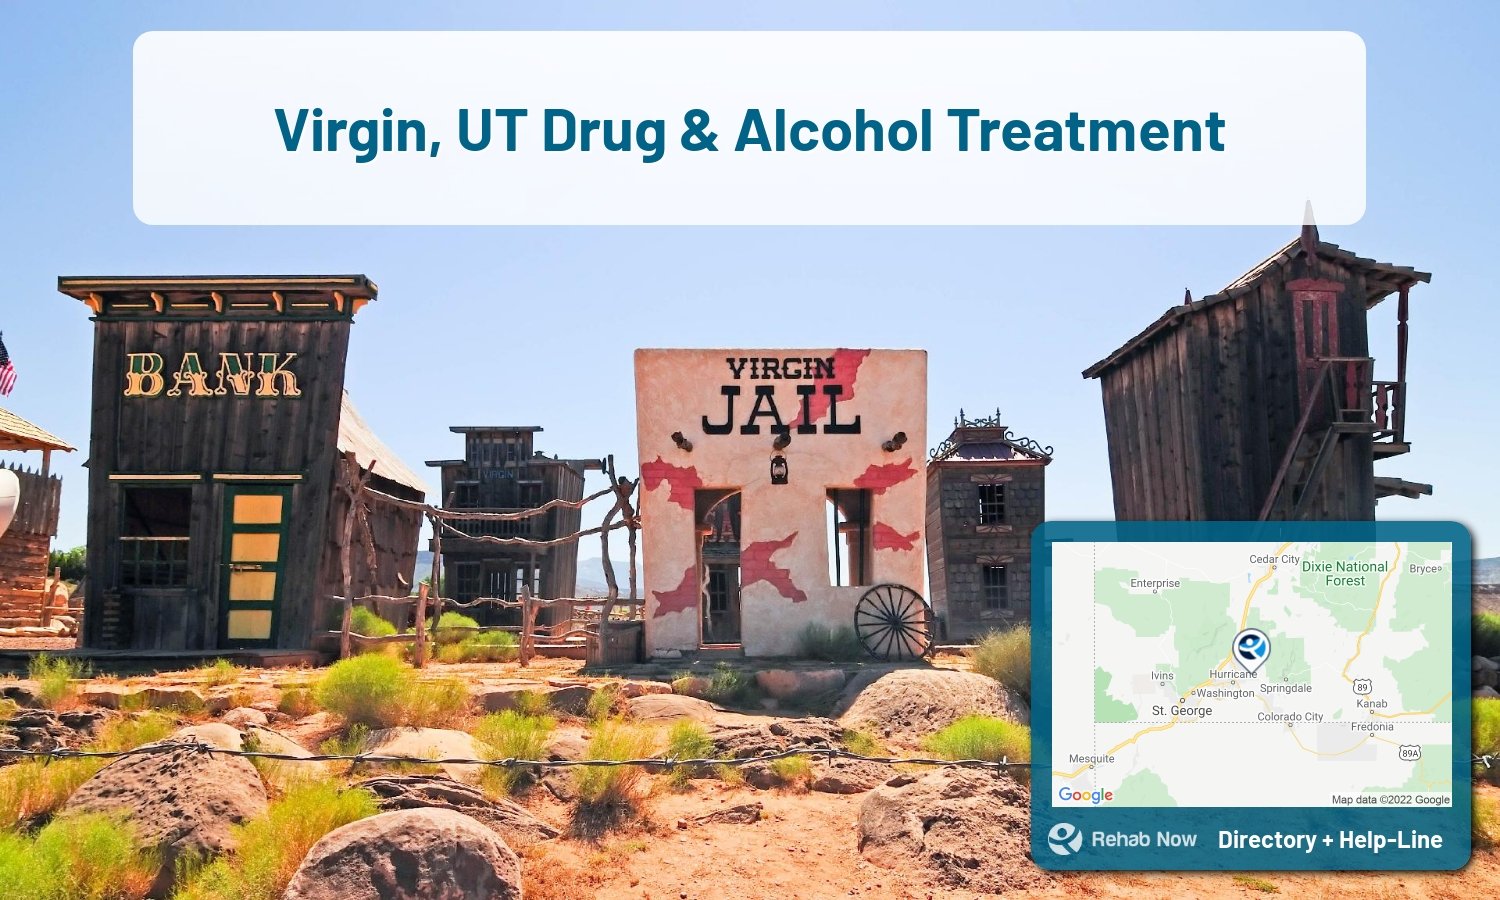 Let our expert counselors help find the best addiction treatment in Virgin, Utah now with a free call to our hotline.